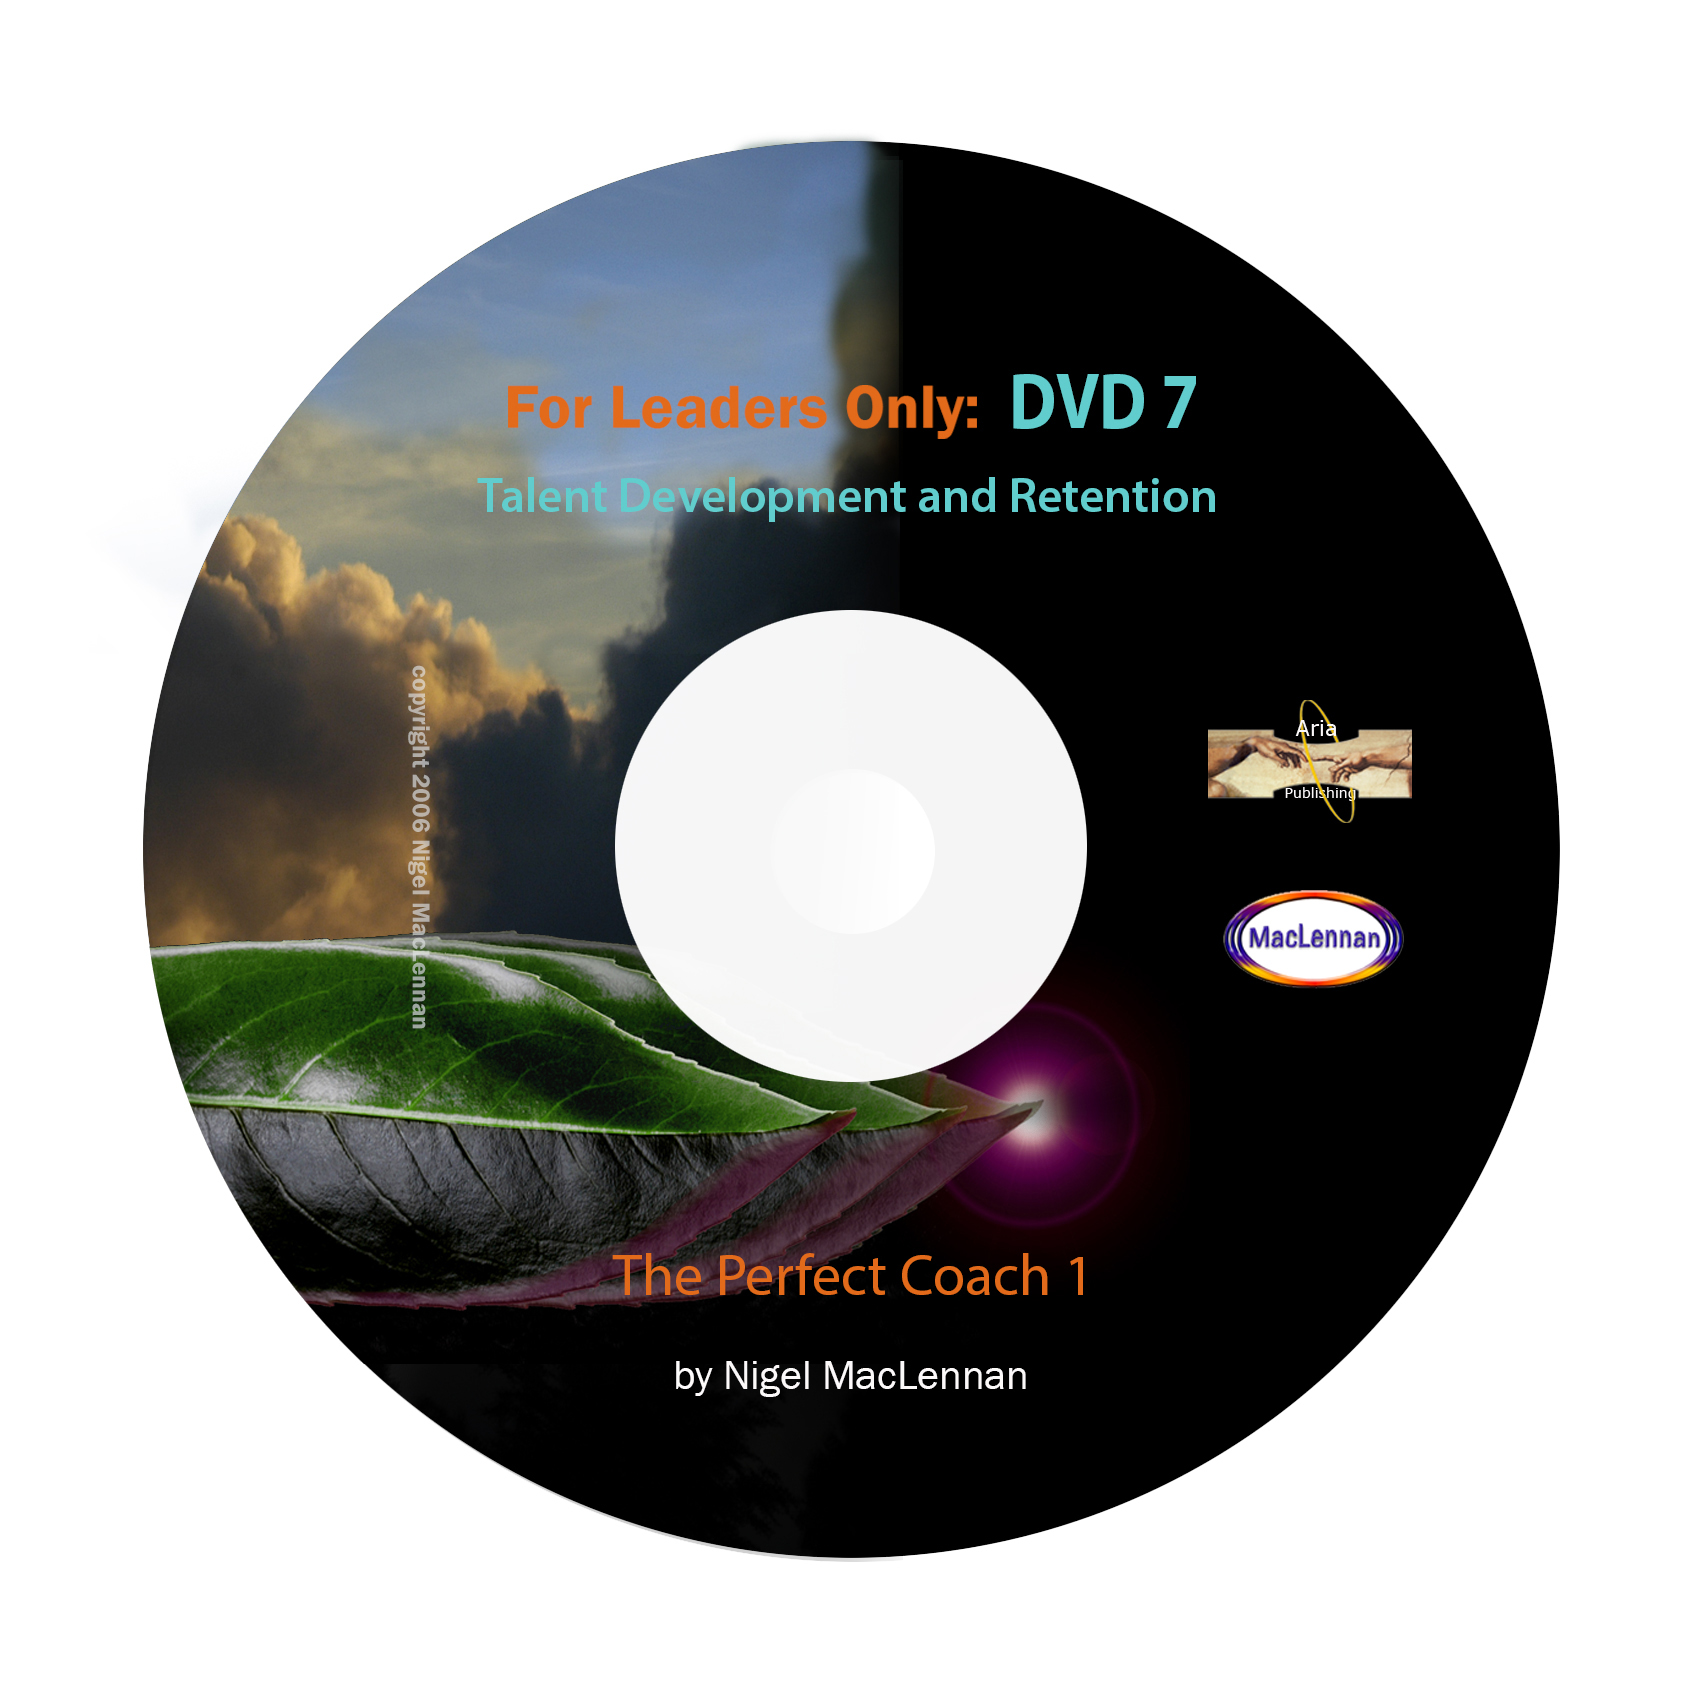 For Leaders Only - The Perfect Coach 1 DVD